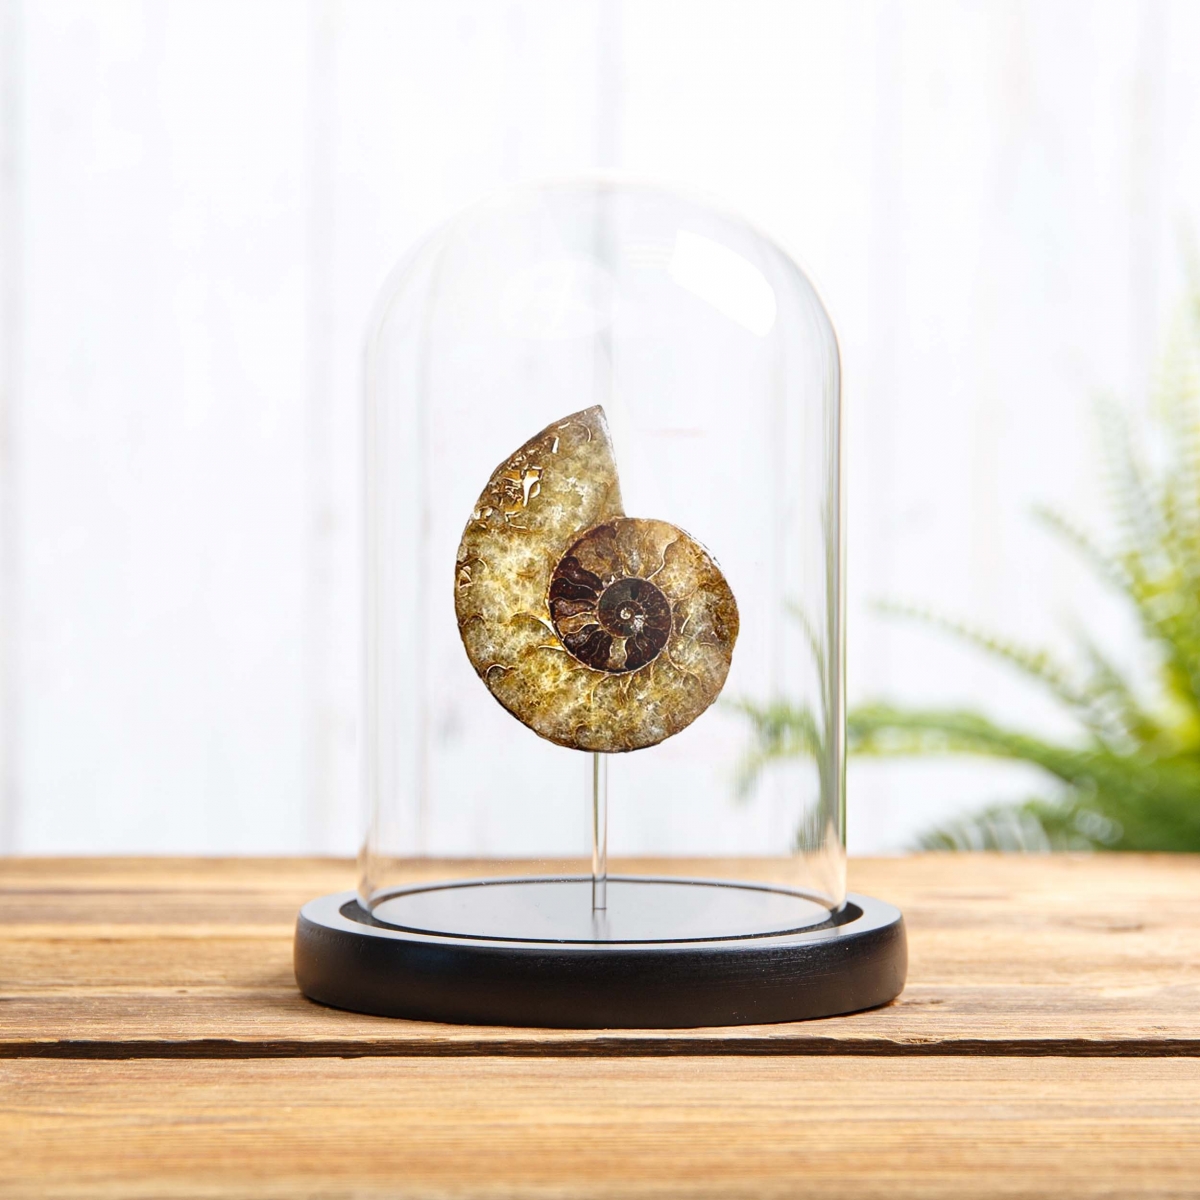 Minibeast Ammonite Cut and Polished Fossil in Glass Dome with Wooden Base (Cleoniceras sp)